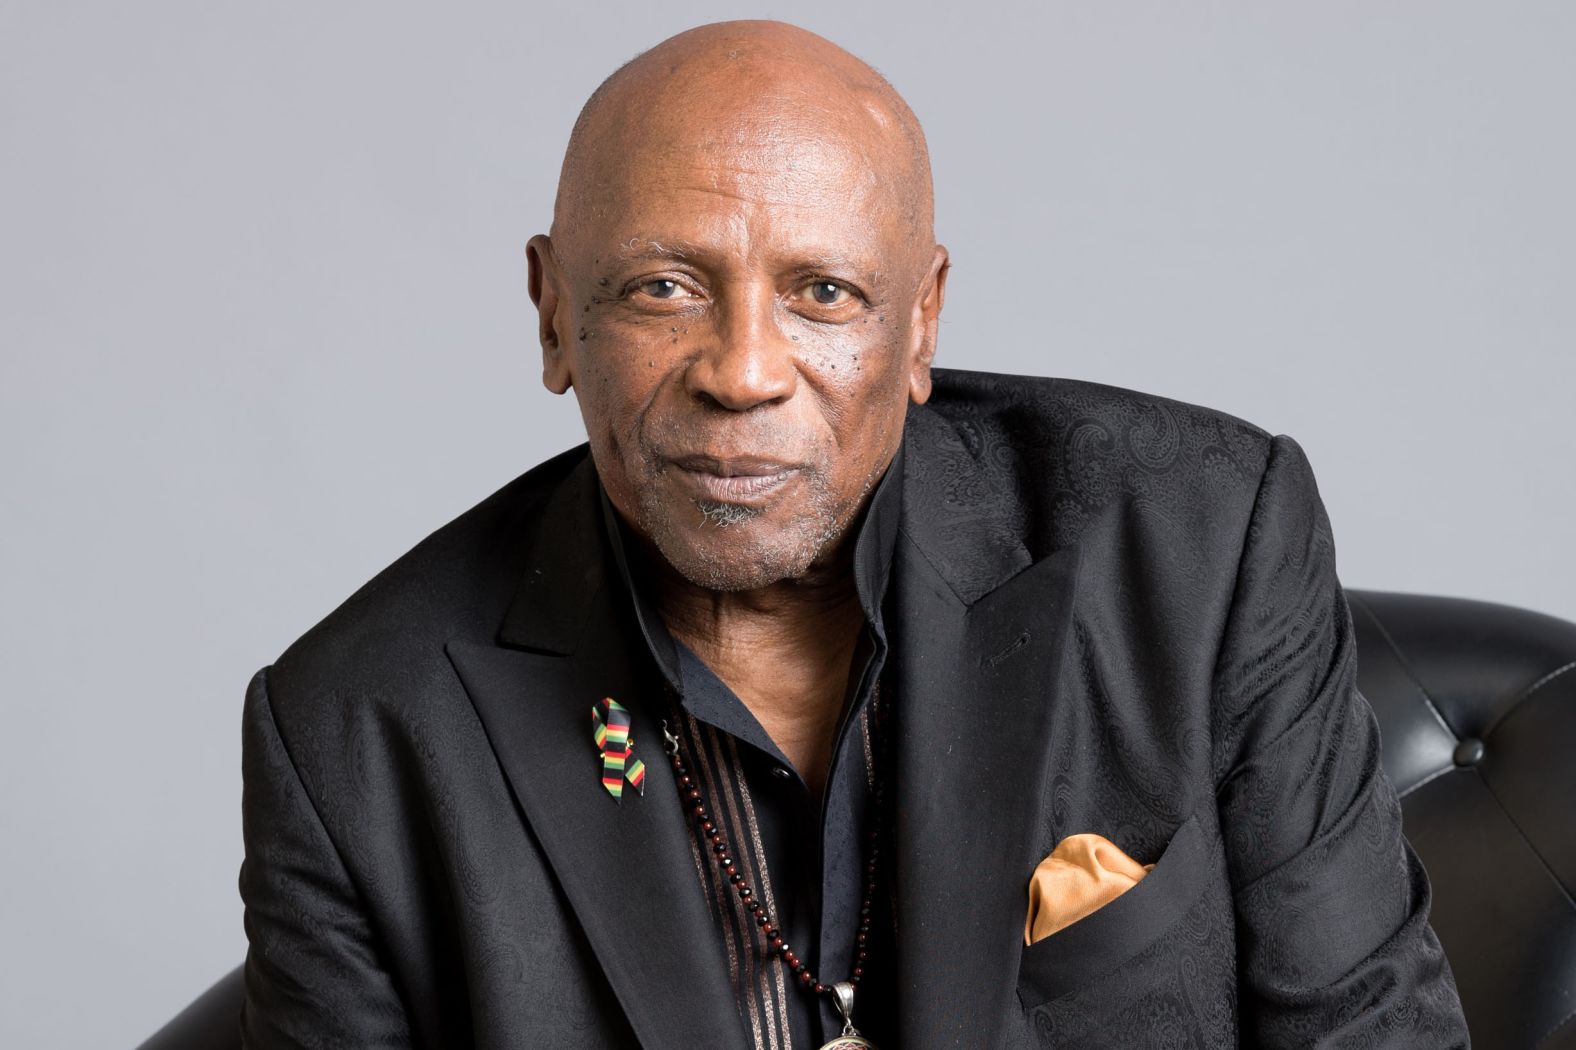 <a href="https://www.cnn.com/2024/03/29/entertainment/louis-gossett-jr-death/index.html" target="_blank">Louis Gossett Jr.</a>, a star of film and television who won an Academy Award for his performance in "An Officer and a Gentleman," died Friday, March 29, according to a statement from his family. He was 87.